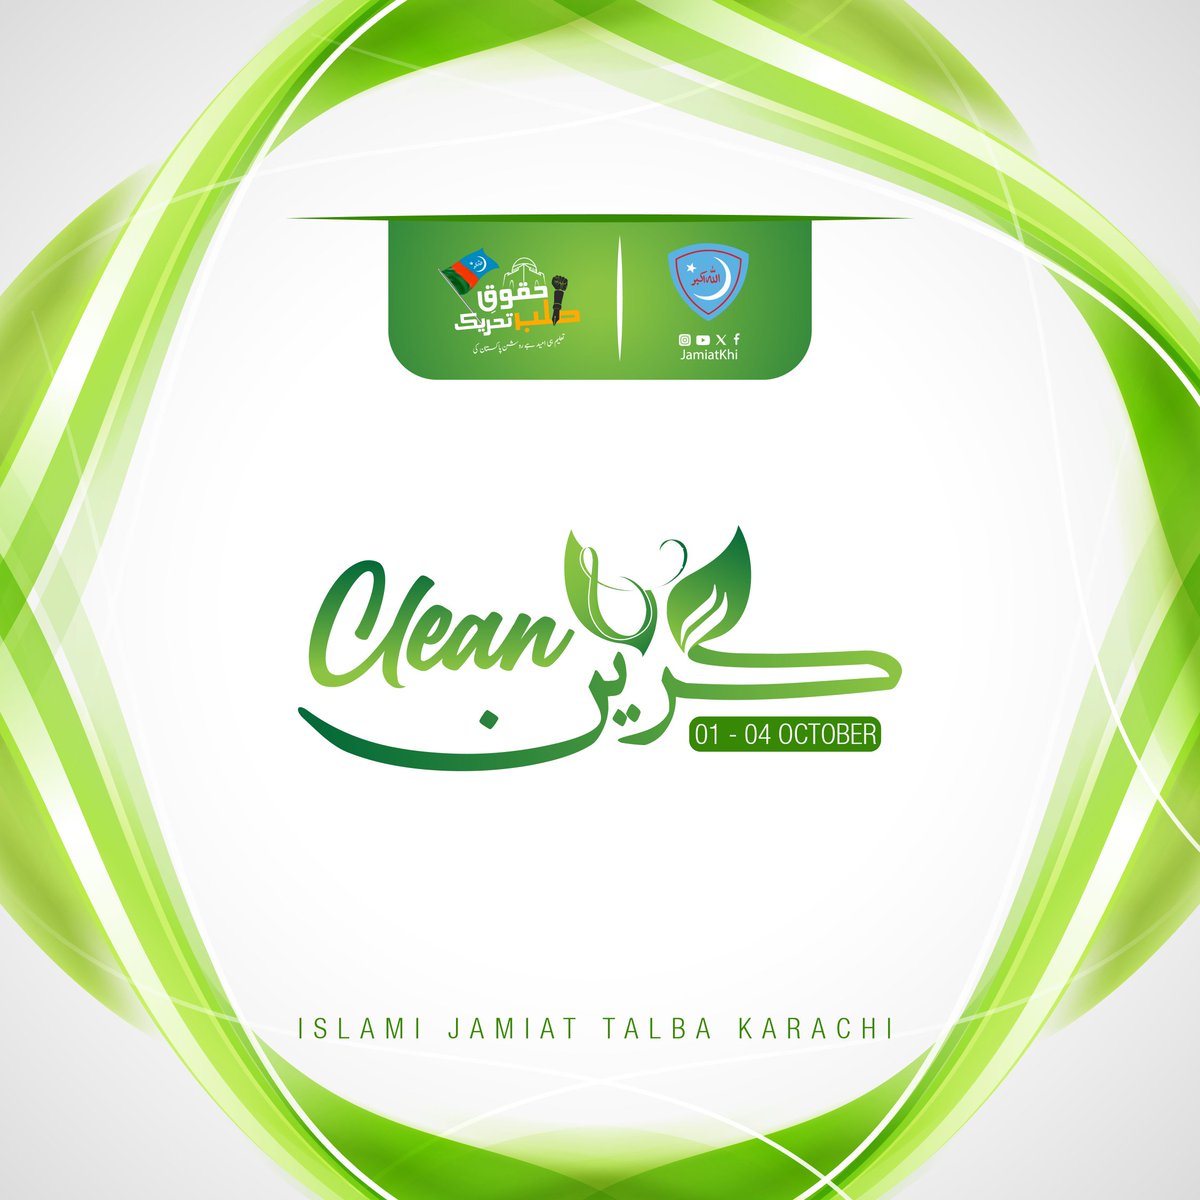 IJT Karachi will lead revolutional campaign 'Clean and Green' 💚✨

Scheduled from 1st to 4th October, join us to be part of this change remembering as half of faith 🌱🌍

#IJTkarachi #JamiatKhi #Jamiat
#Huqooqe_Talba_Tehreek #حقوق_طلبہ_تحریک  #CleanAndGreen